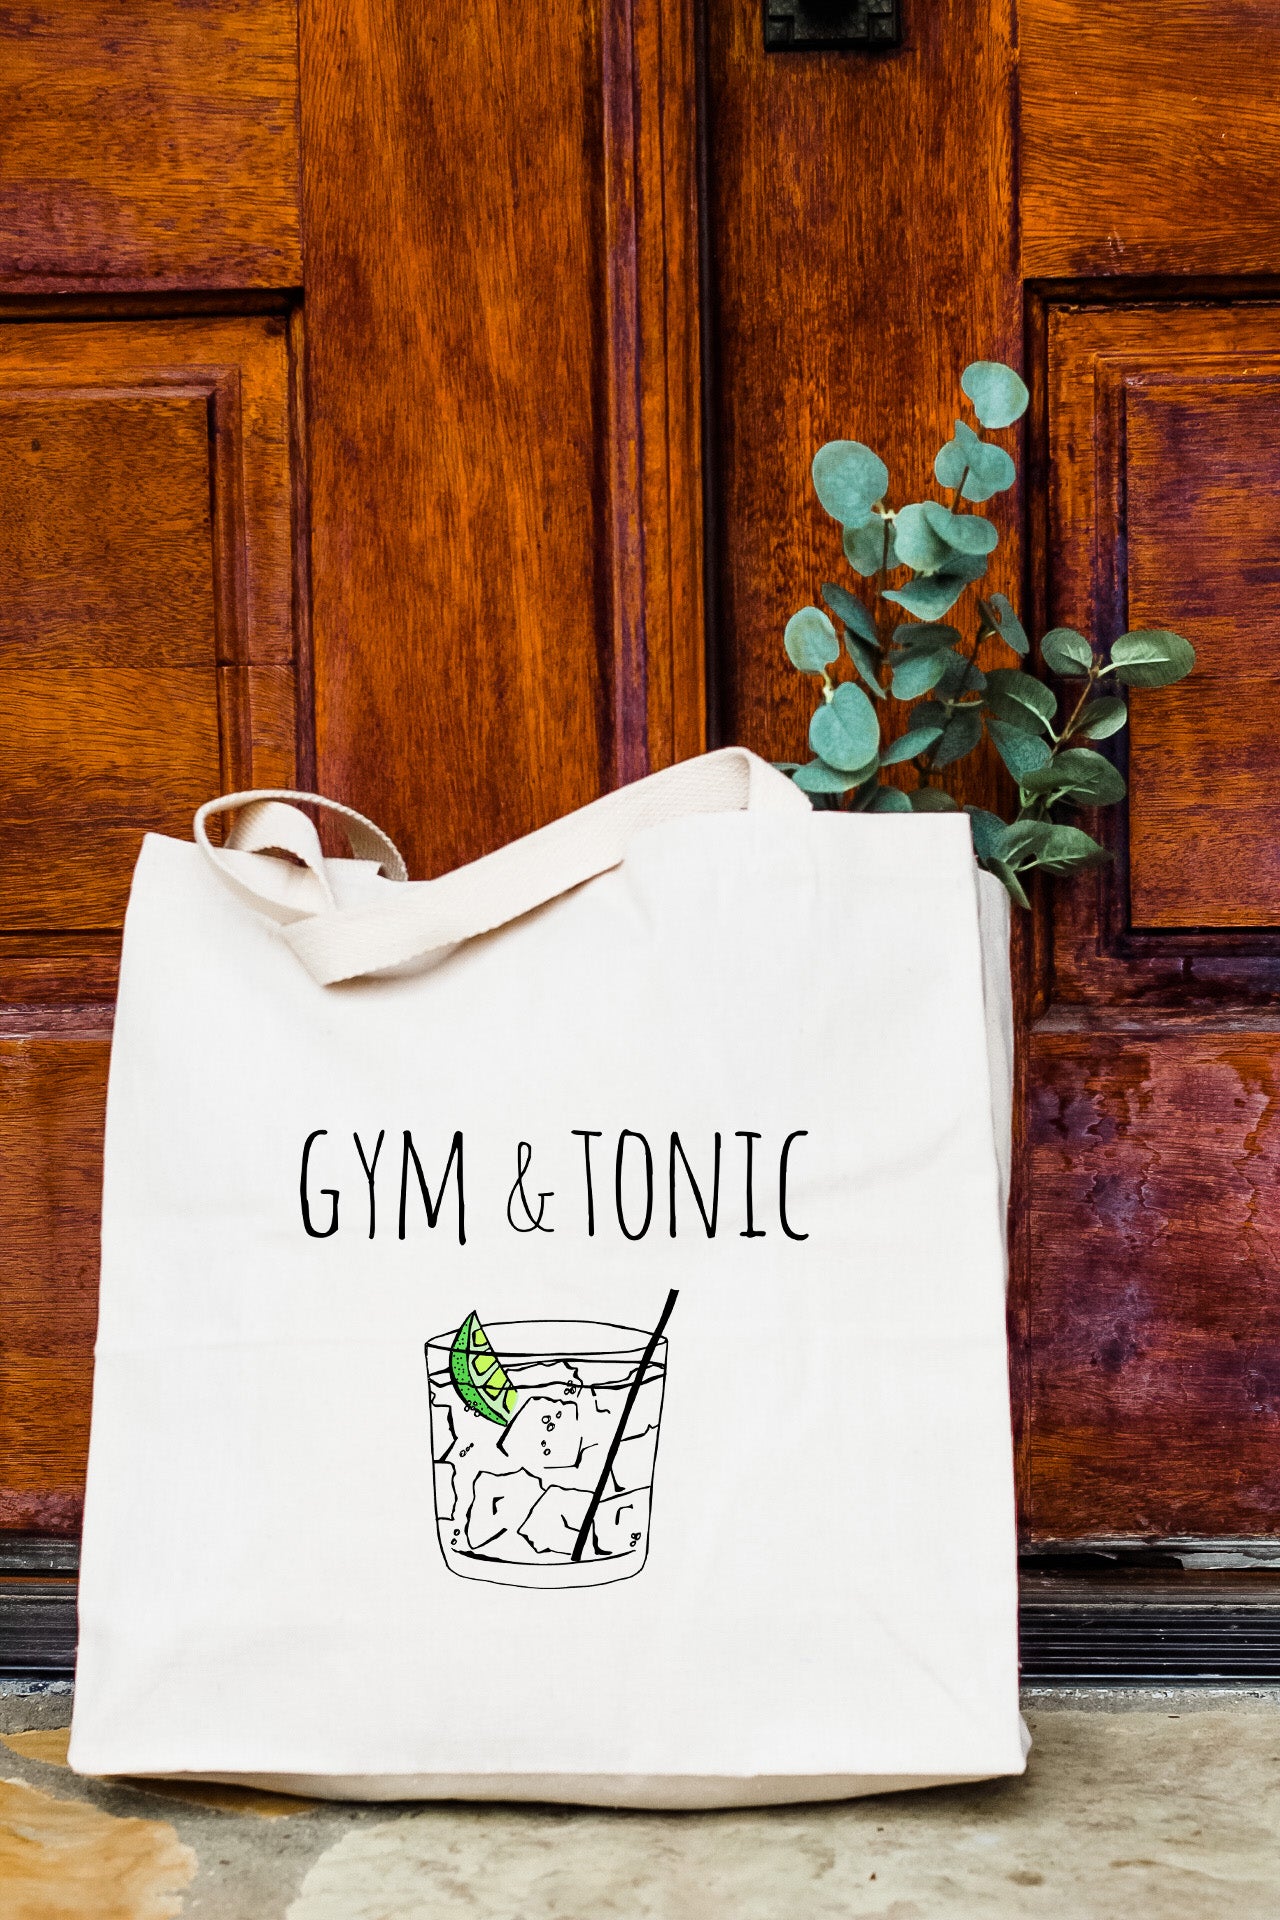 a gym and tonic bag sitting on the ground